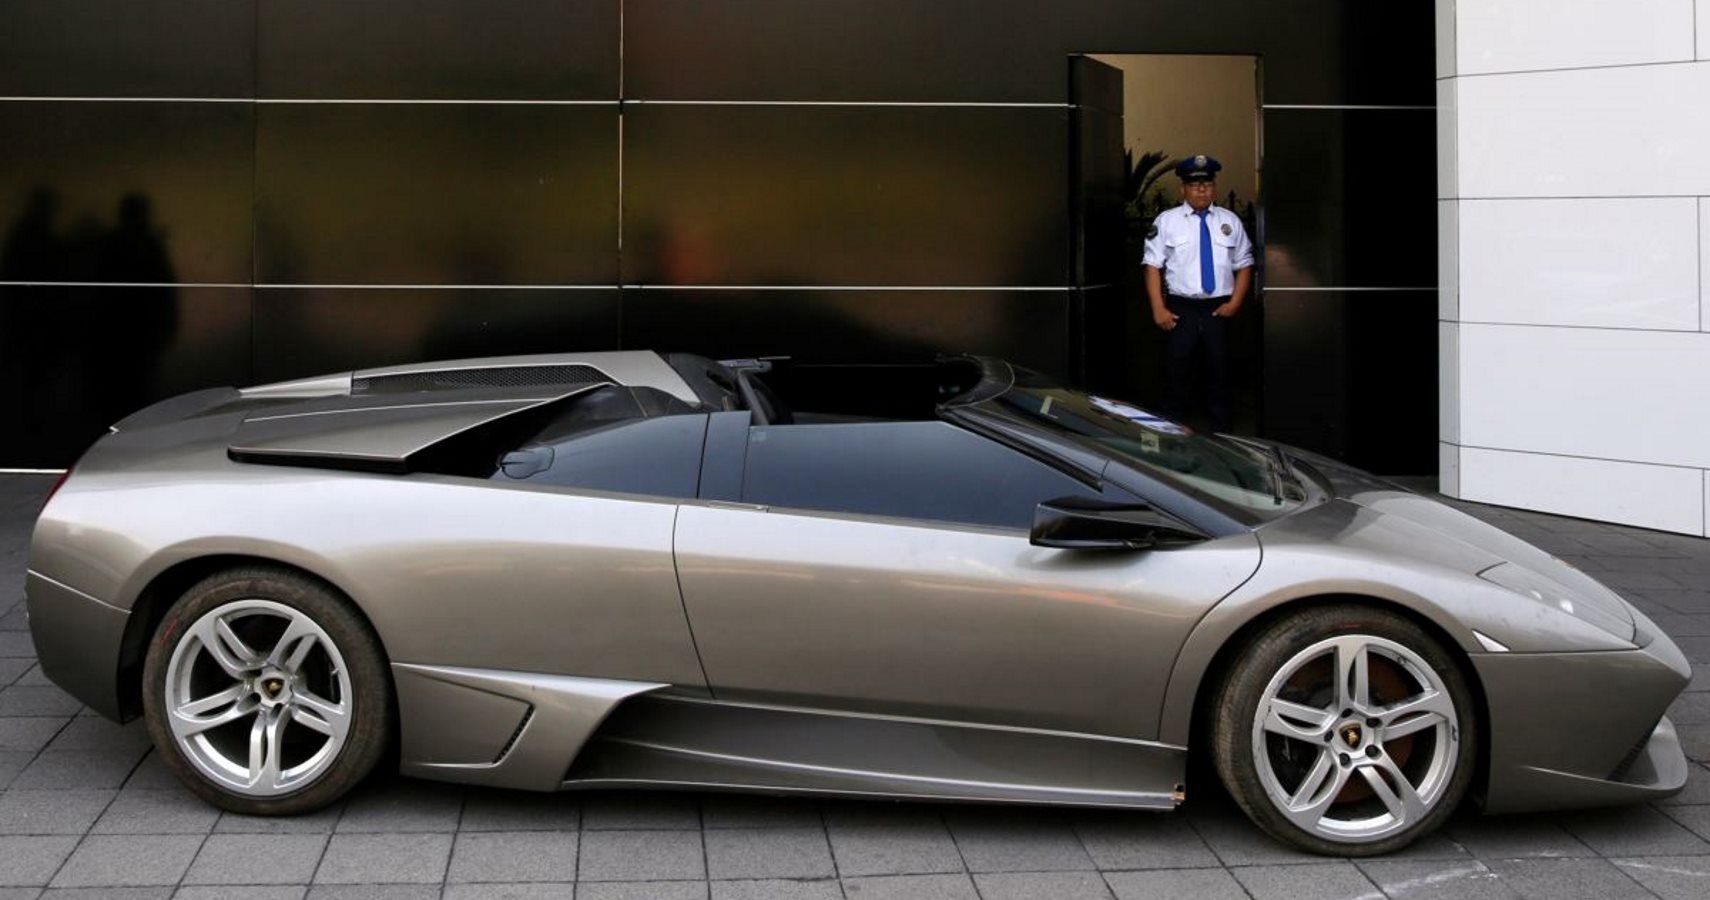 Mexico Is Auctioning A Seized Lamborghini From Drug Cartel To Help The Poor